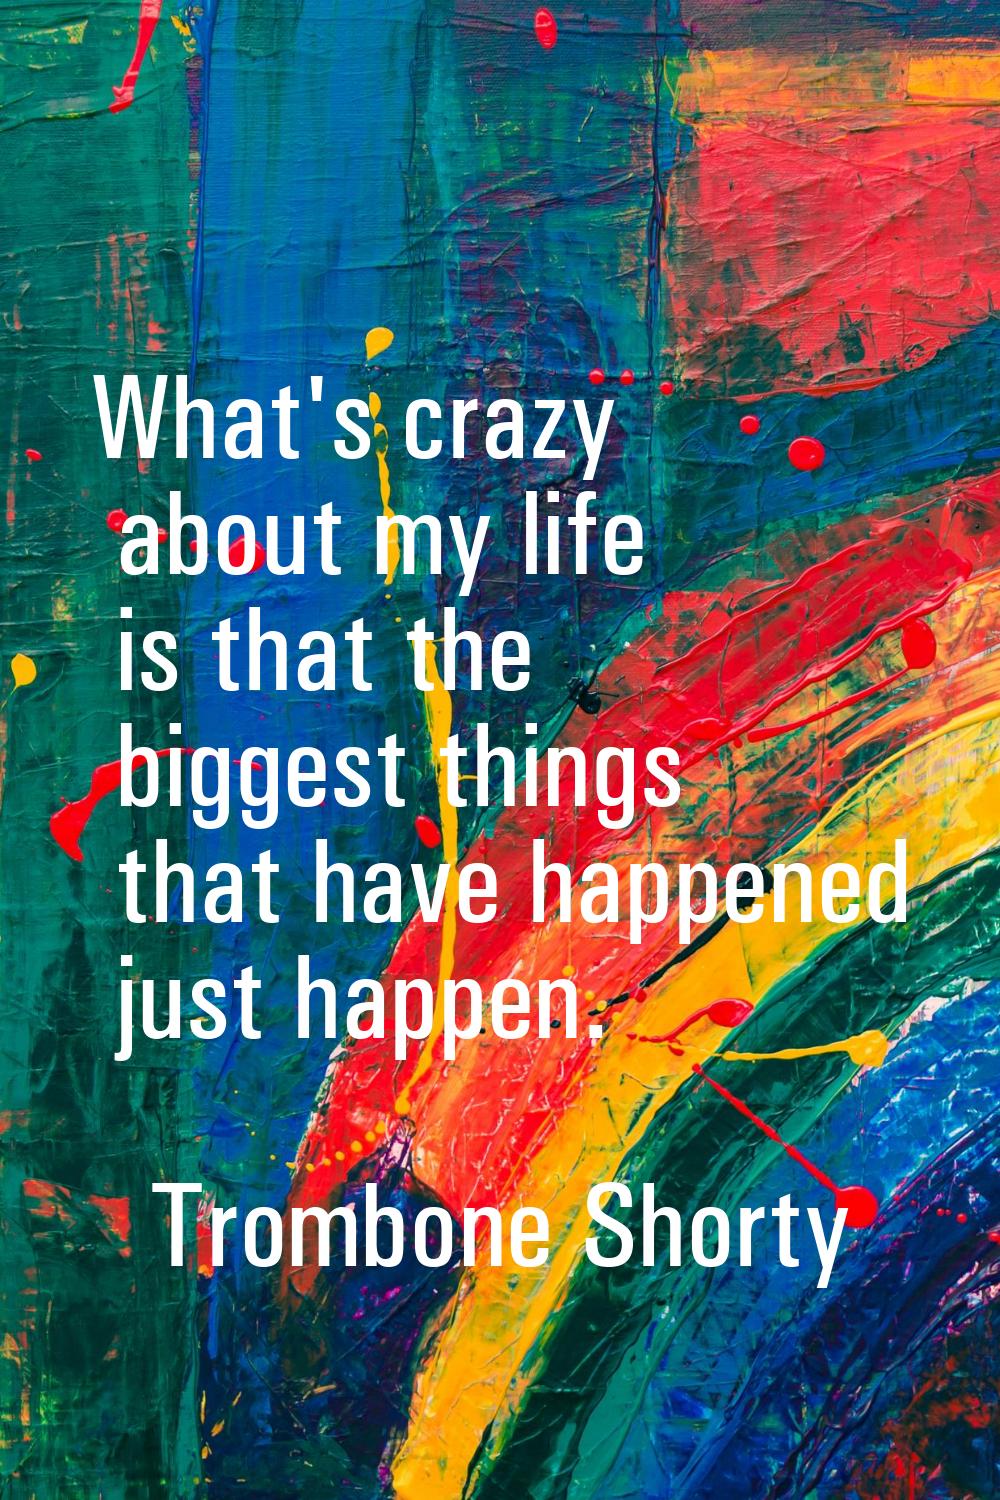 What's crazy about my life is that the biggest things that have happened just happen.